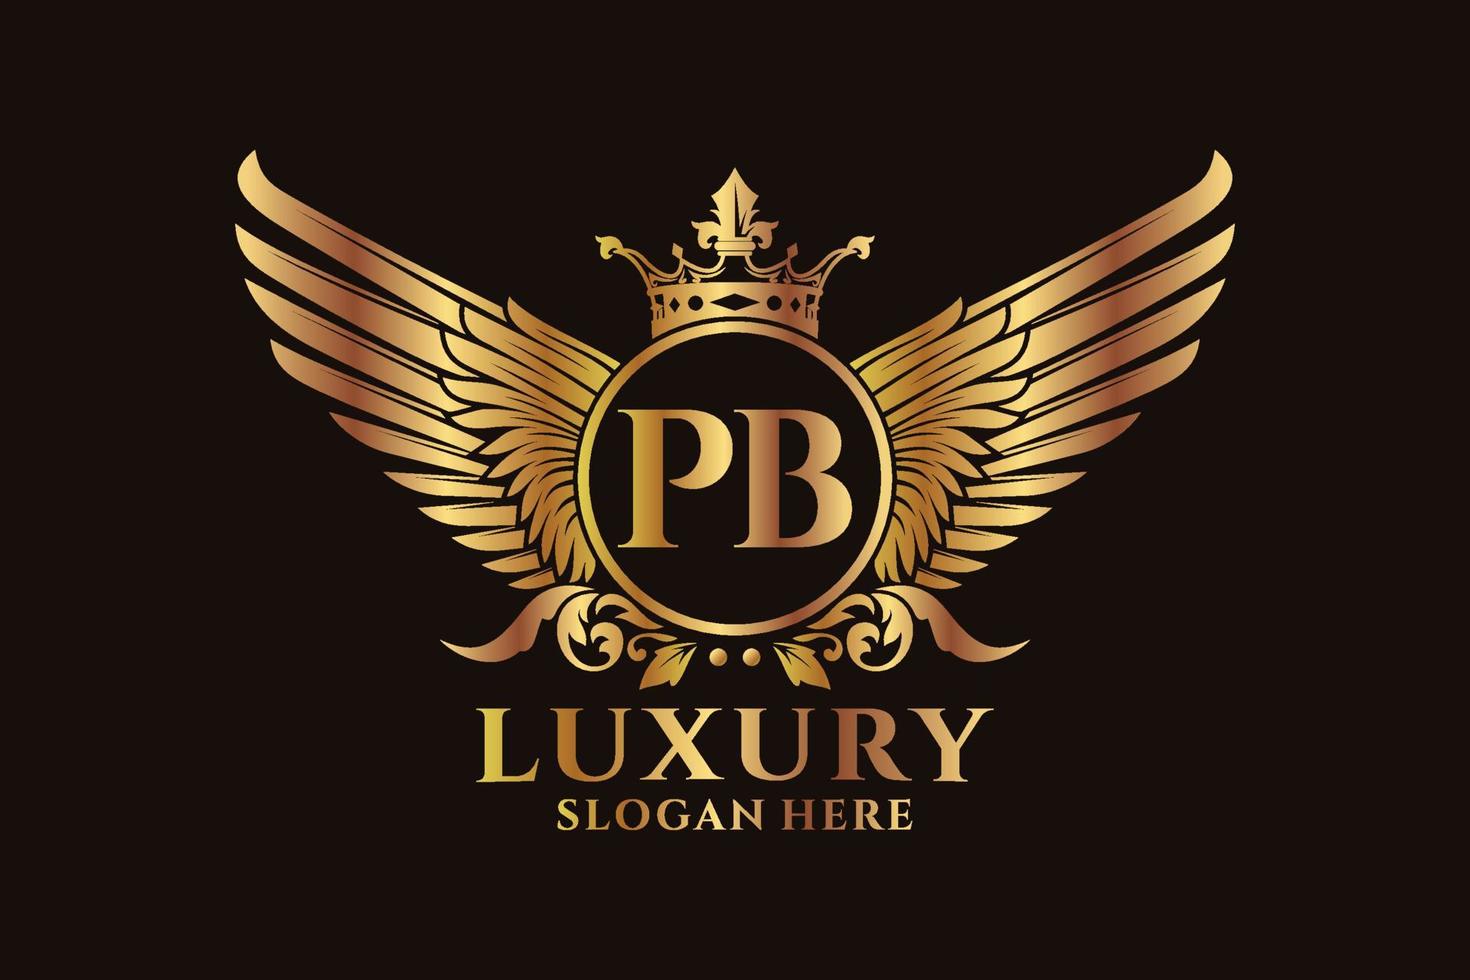 Luxury royal wing Letter PB crest Gold color Logo vector, Victory logo, crest logo, wing logo, vector logo template.